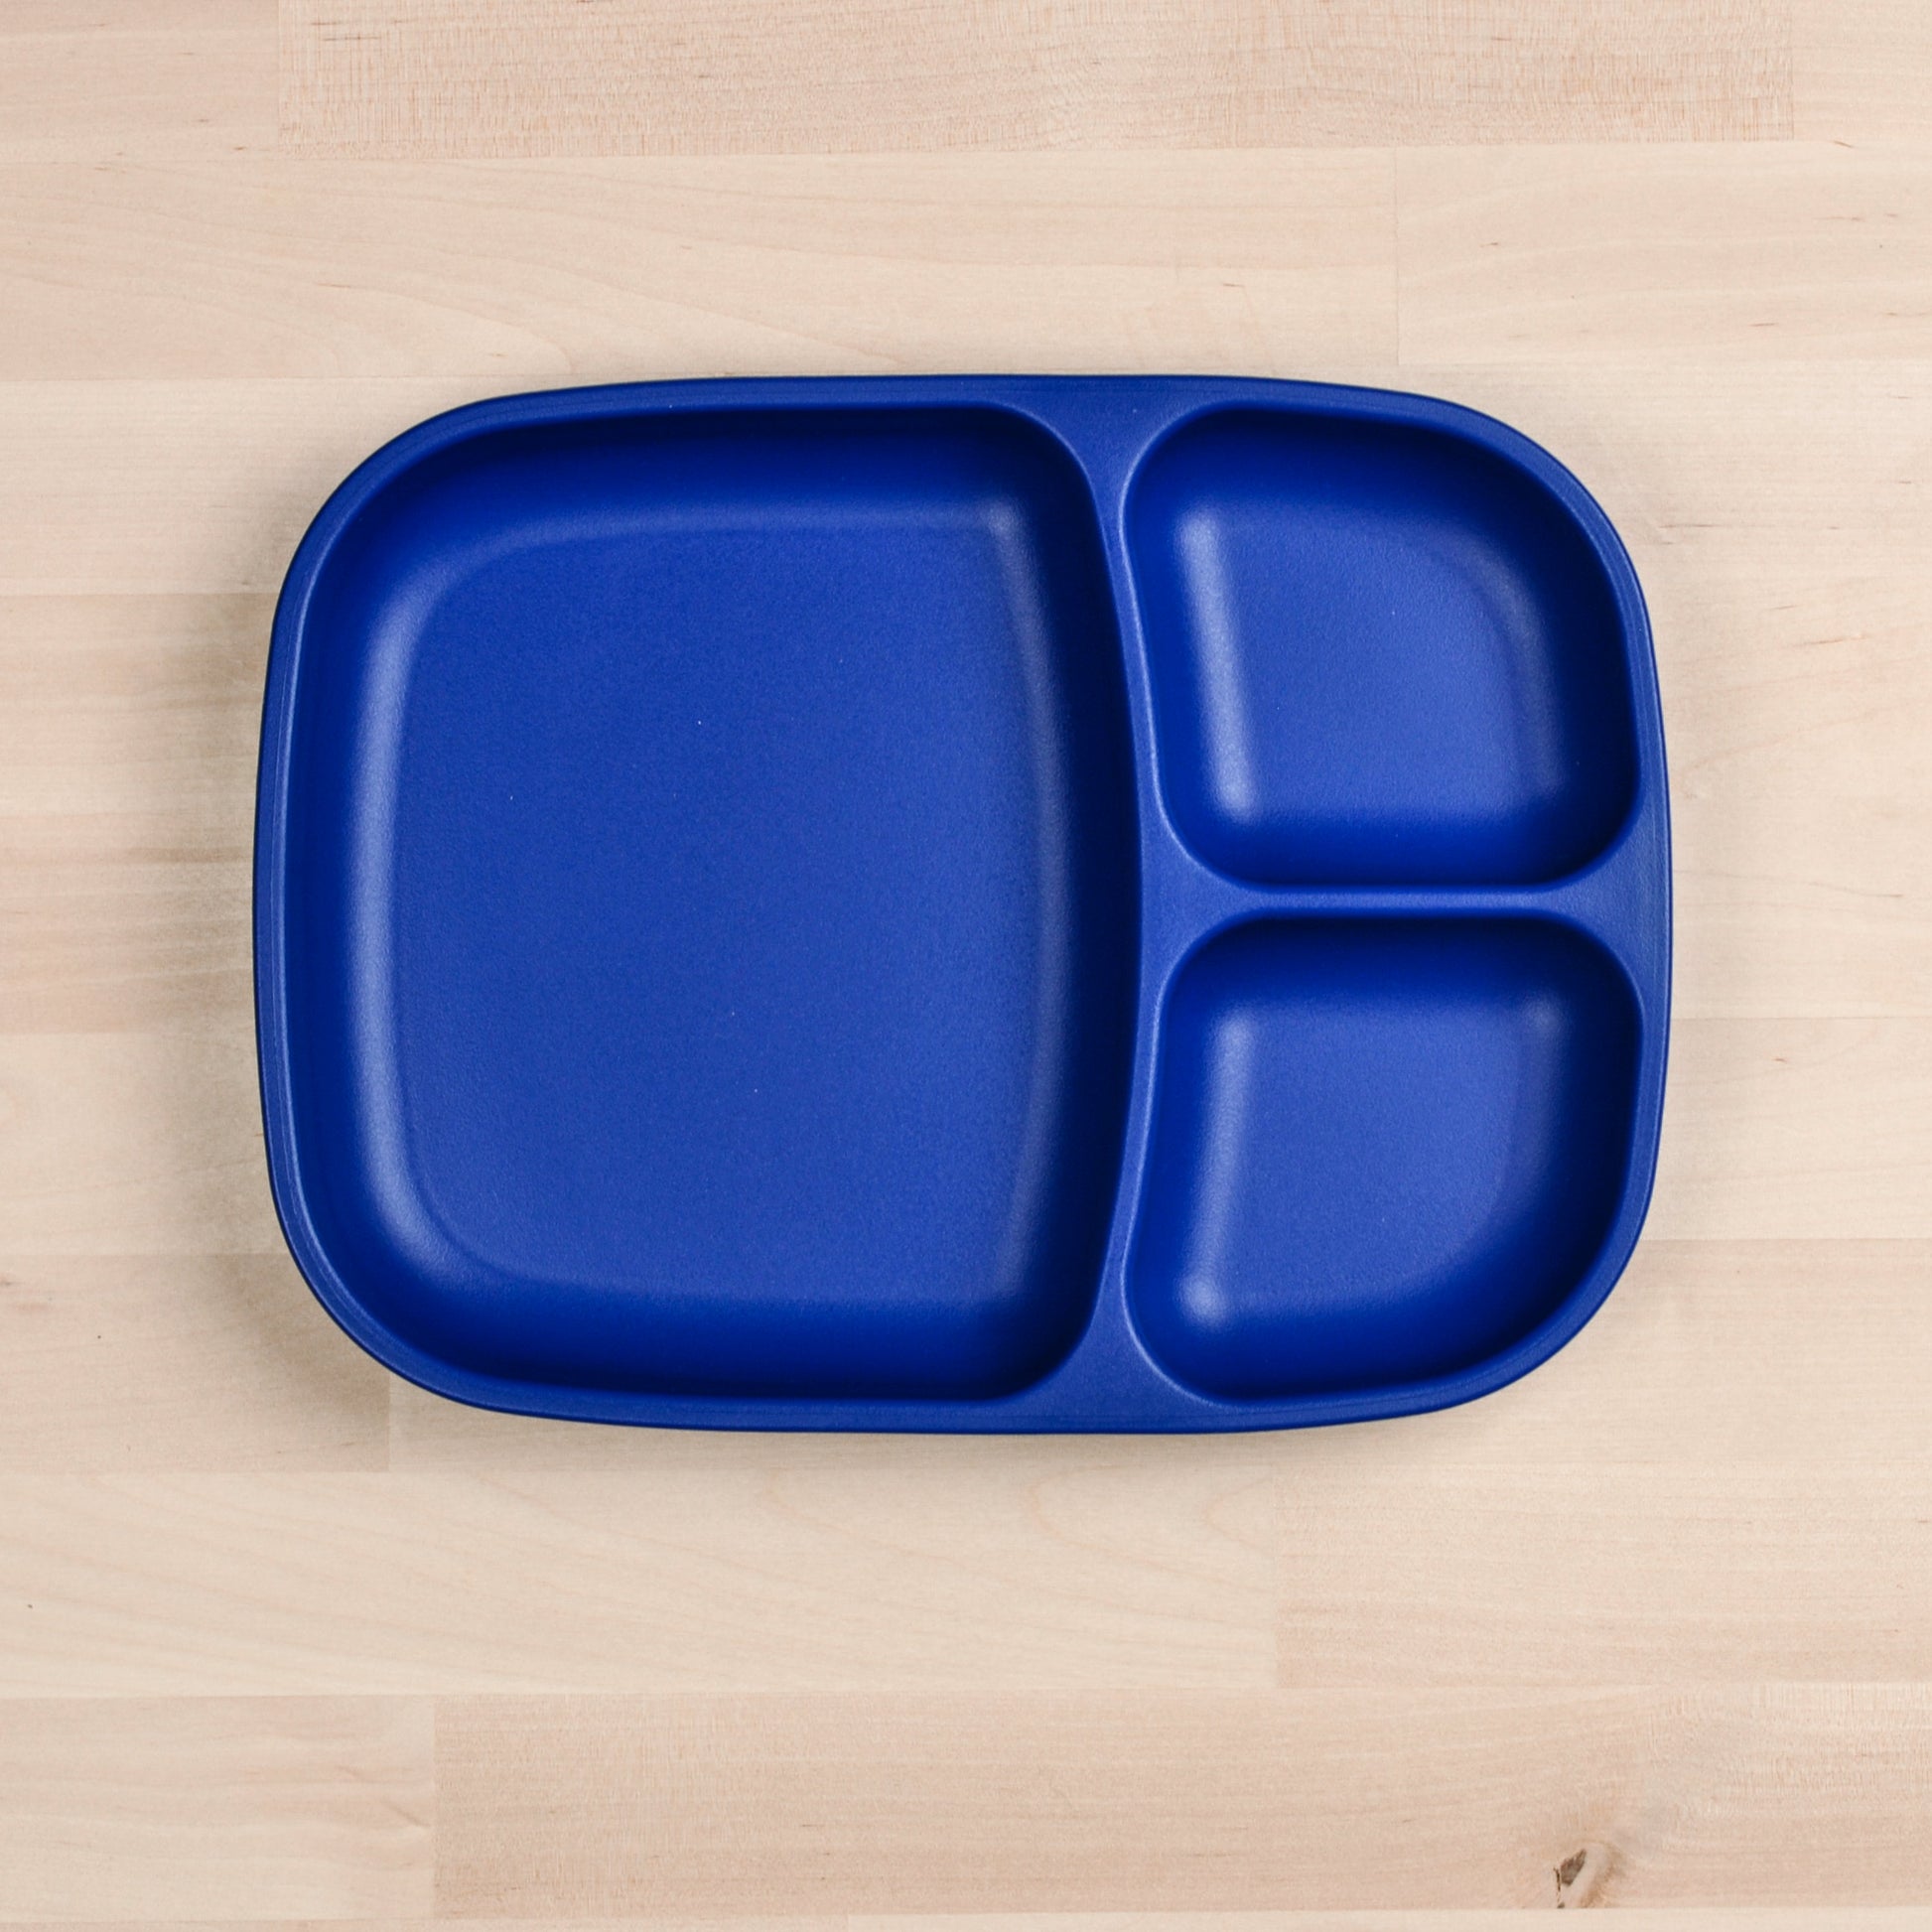 Re-Play Divided Tray in Navy Blue from Bear & Moo